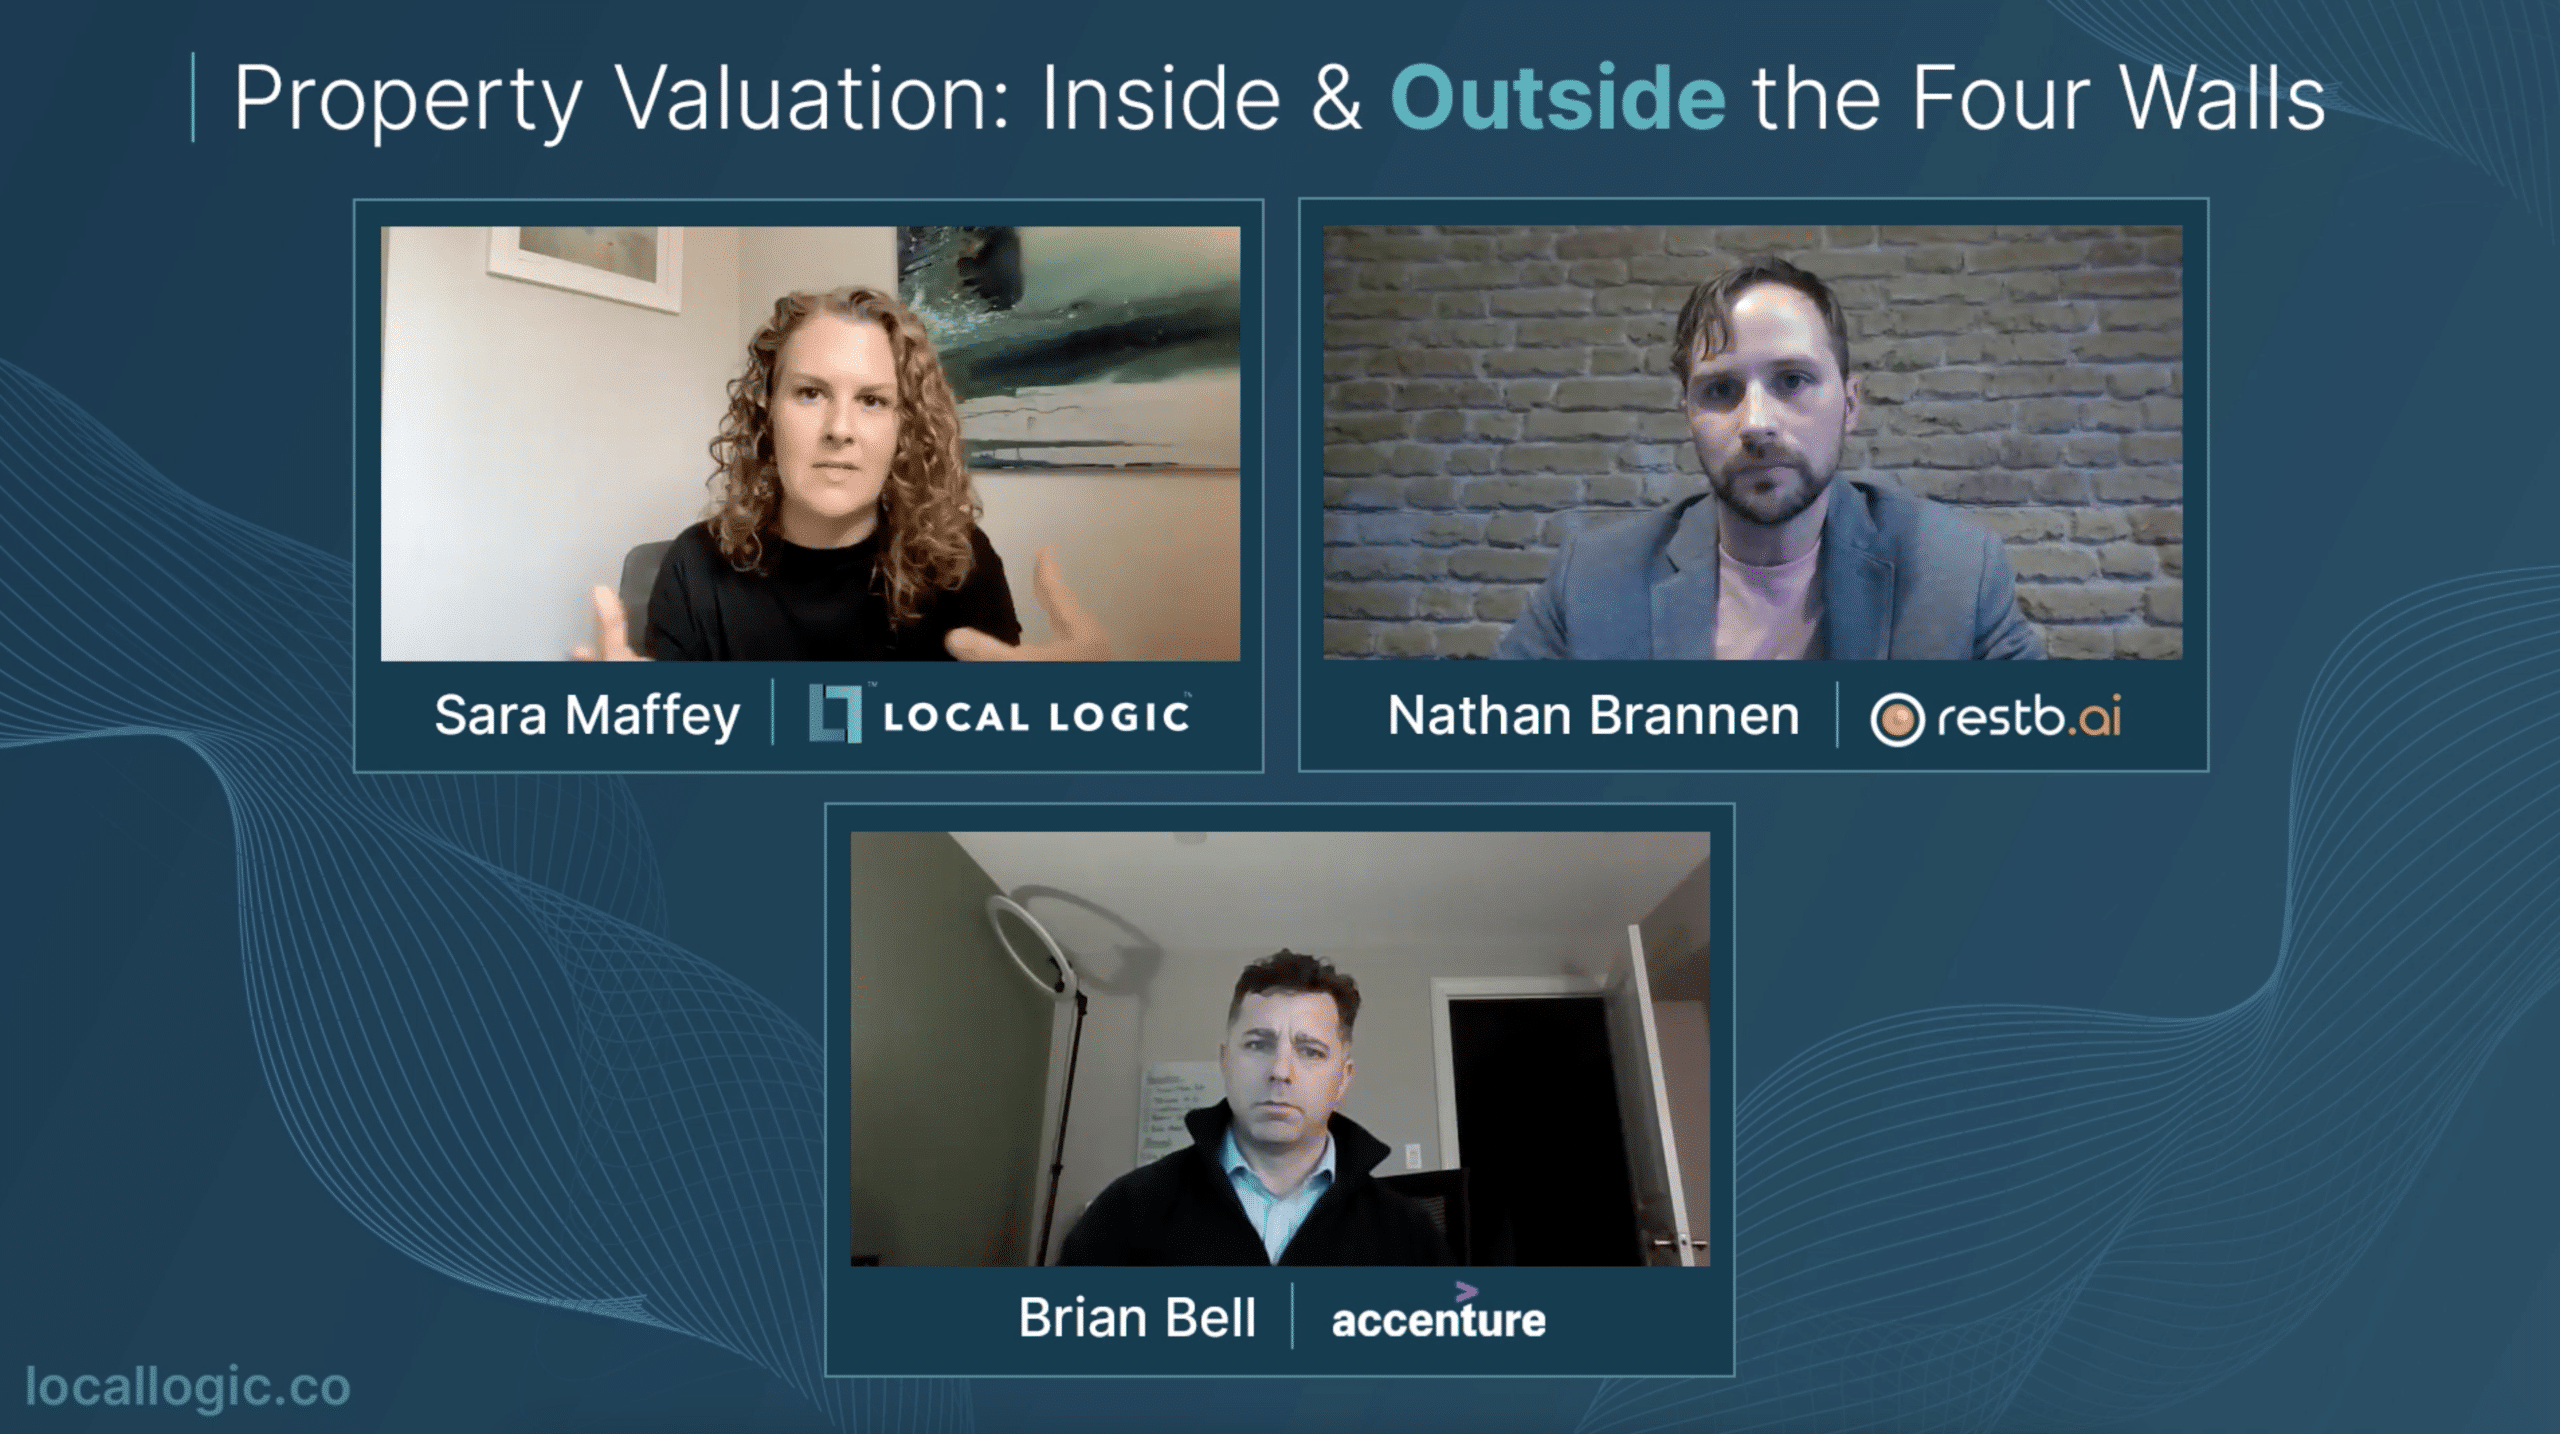 screenshots of sara maffey, nathan brannen, and brian bell who are speakers in the local logic masterclass on property valuation